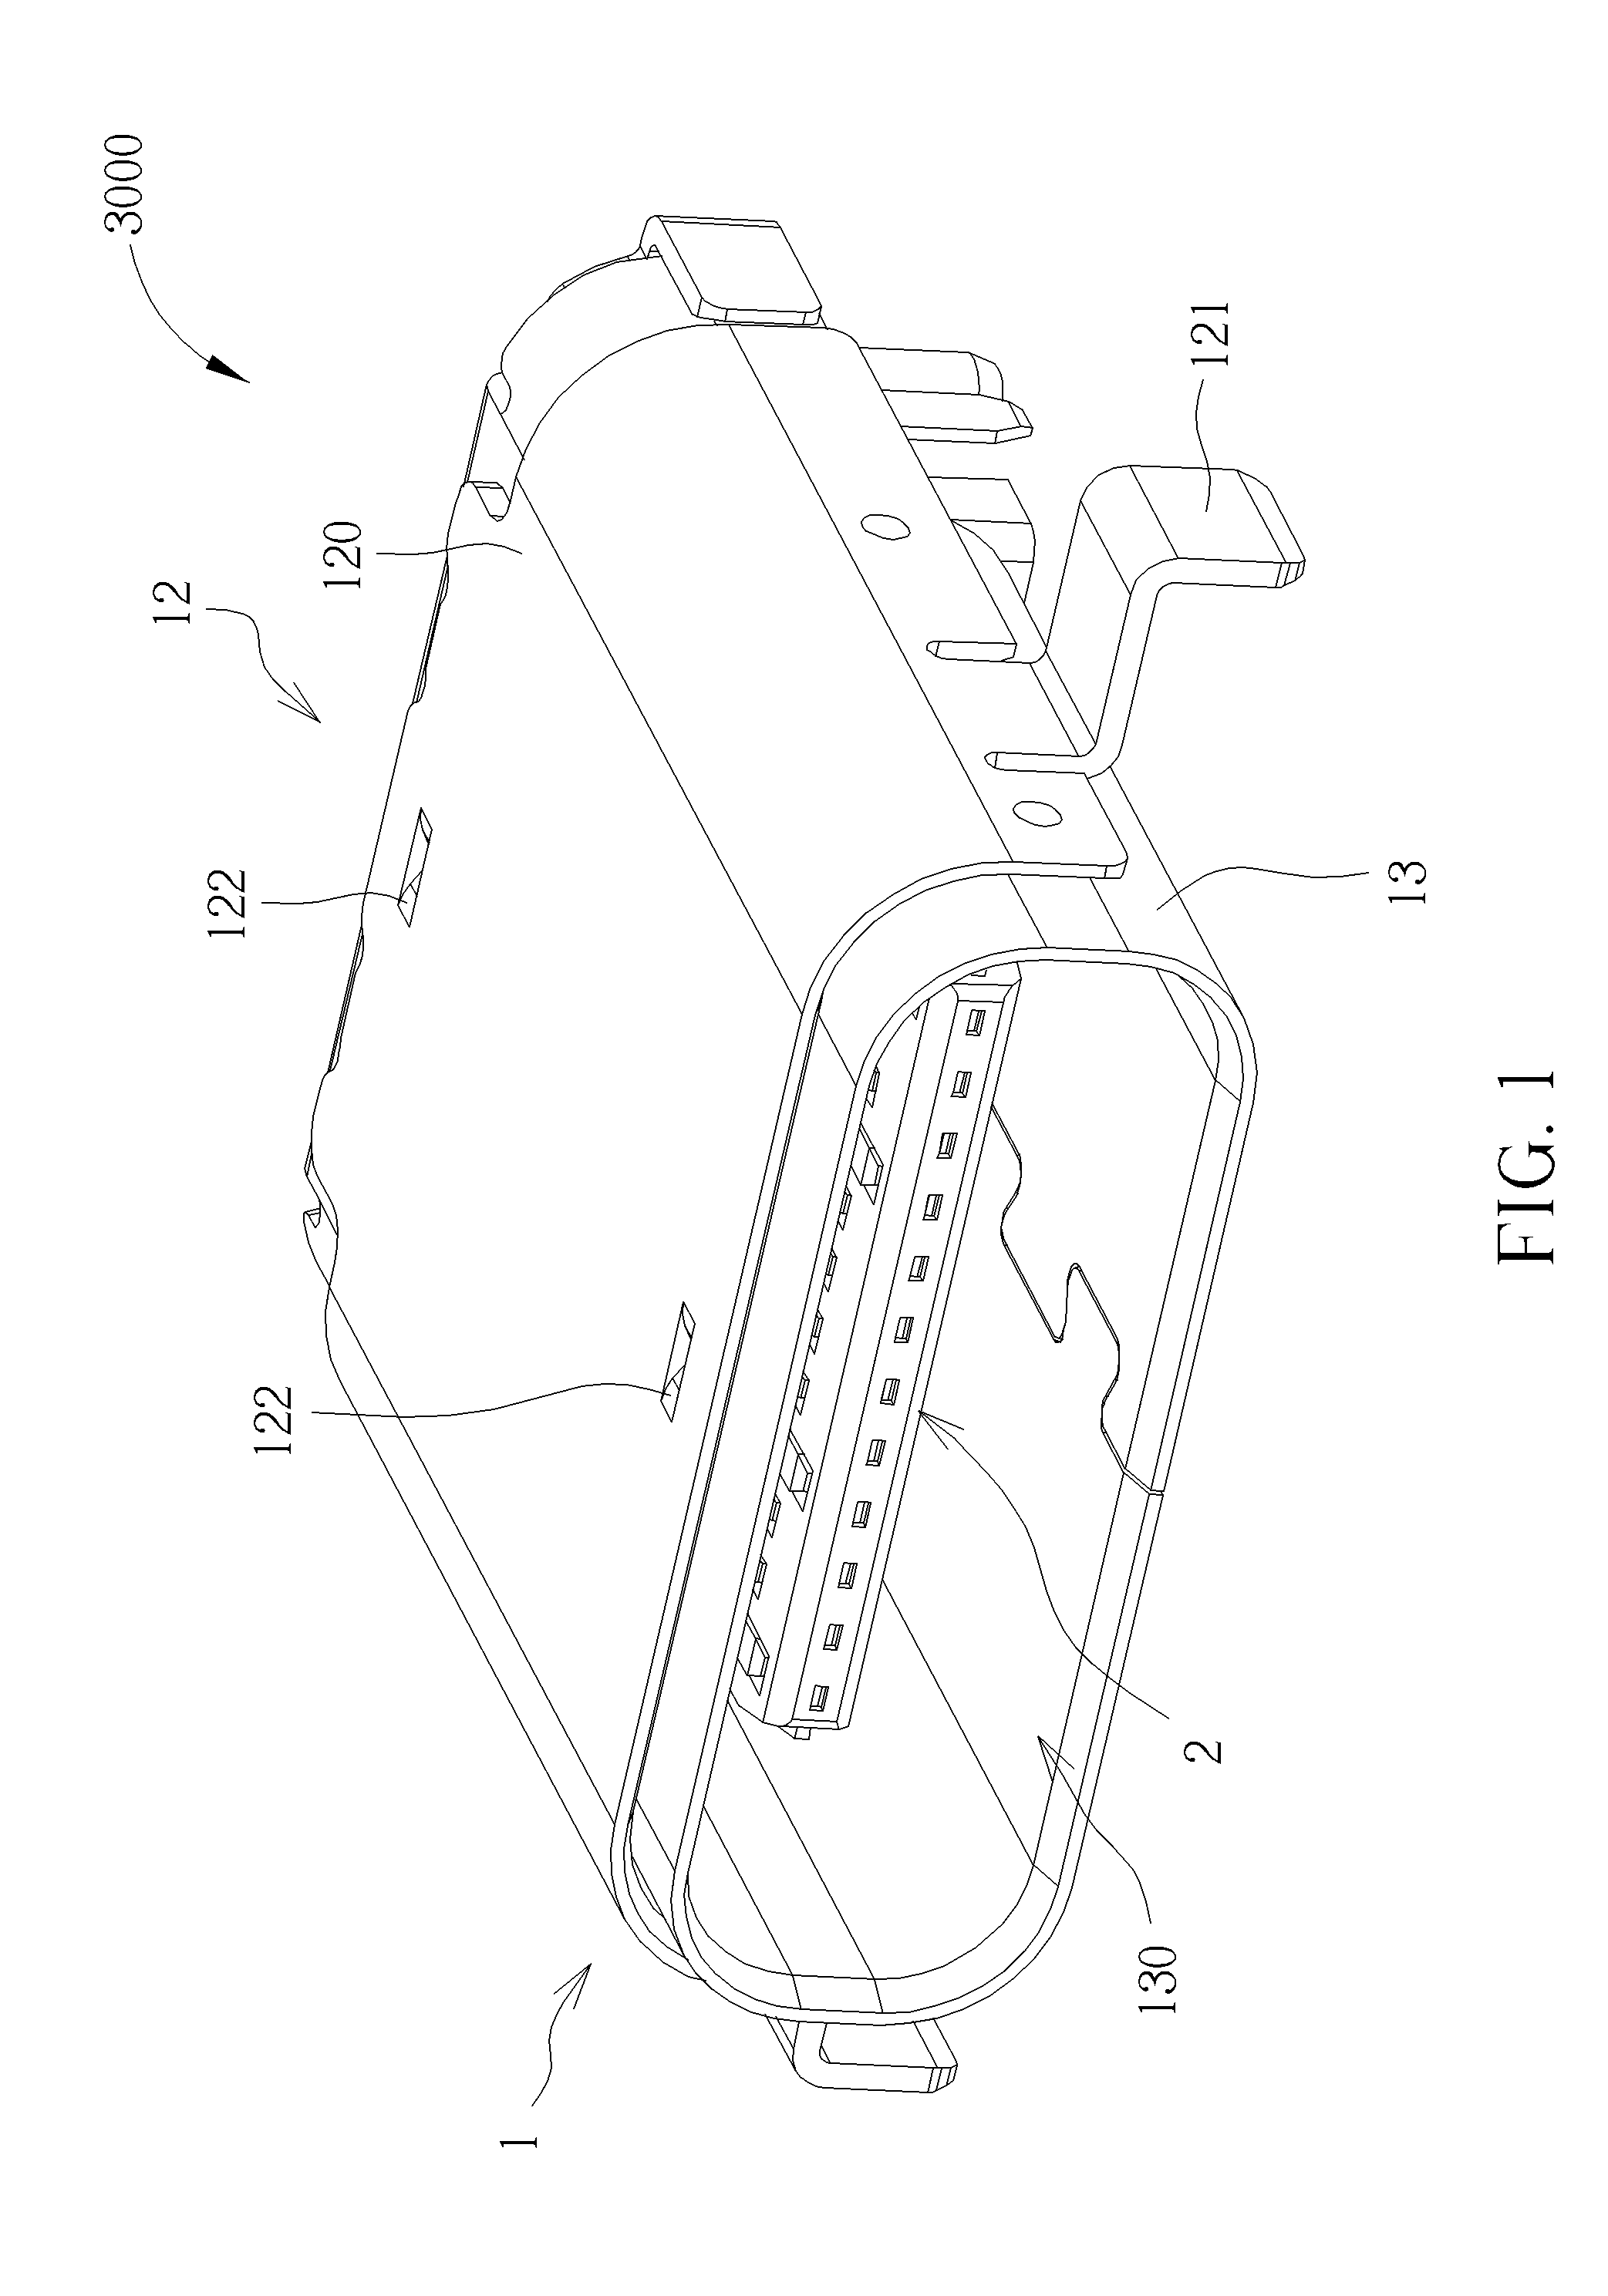 Electrical receptacle connector with shielding and grounding features